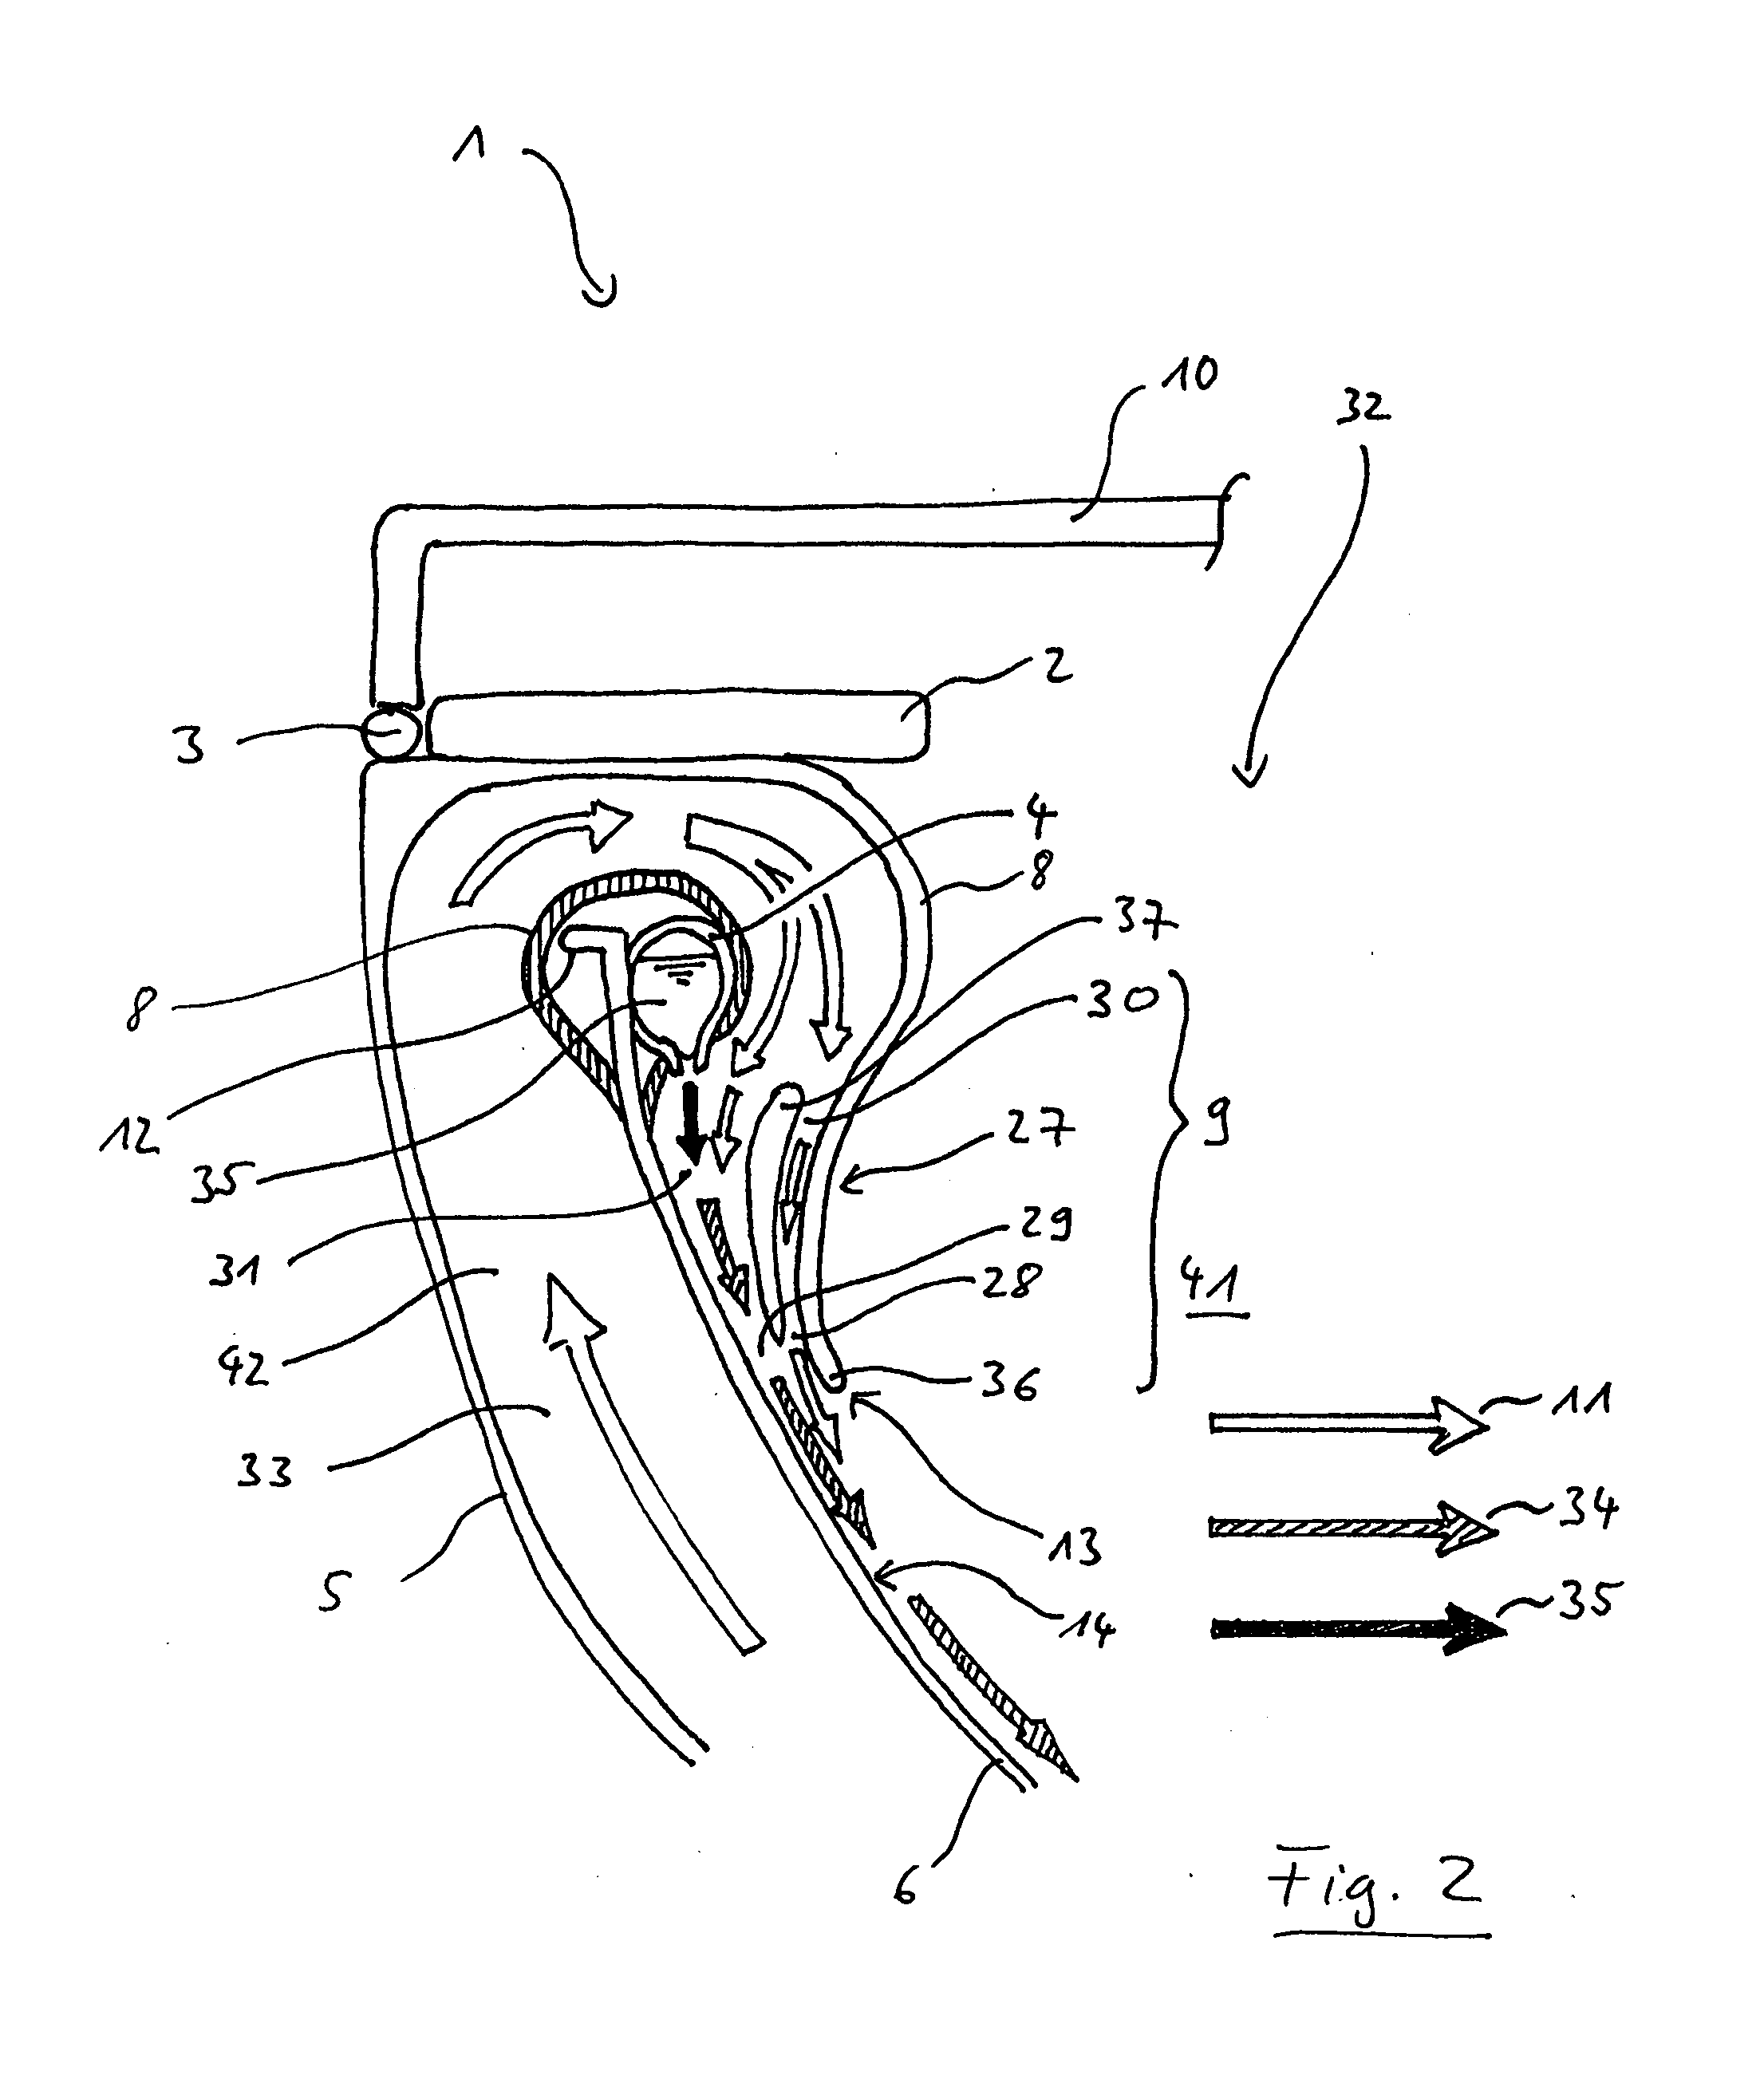 Flushing device and flushing method for a vacuum toilet